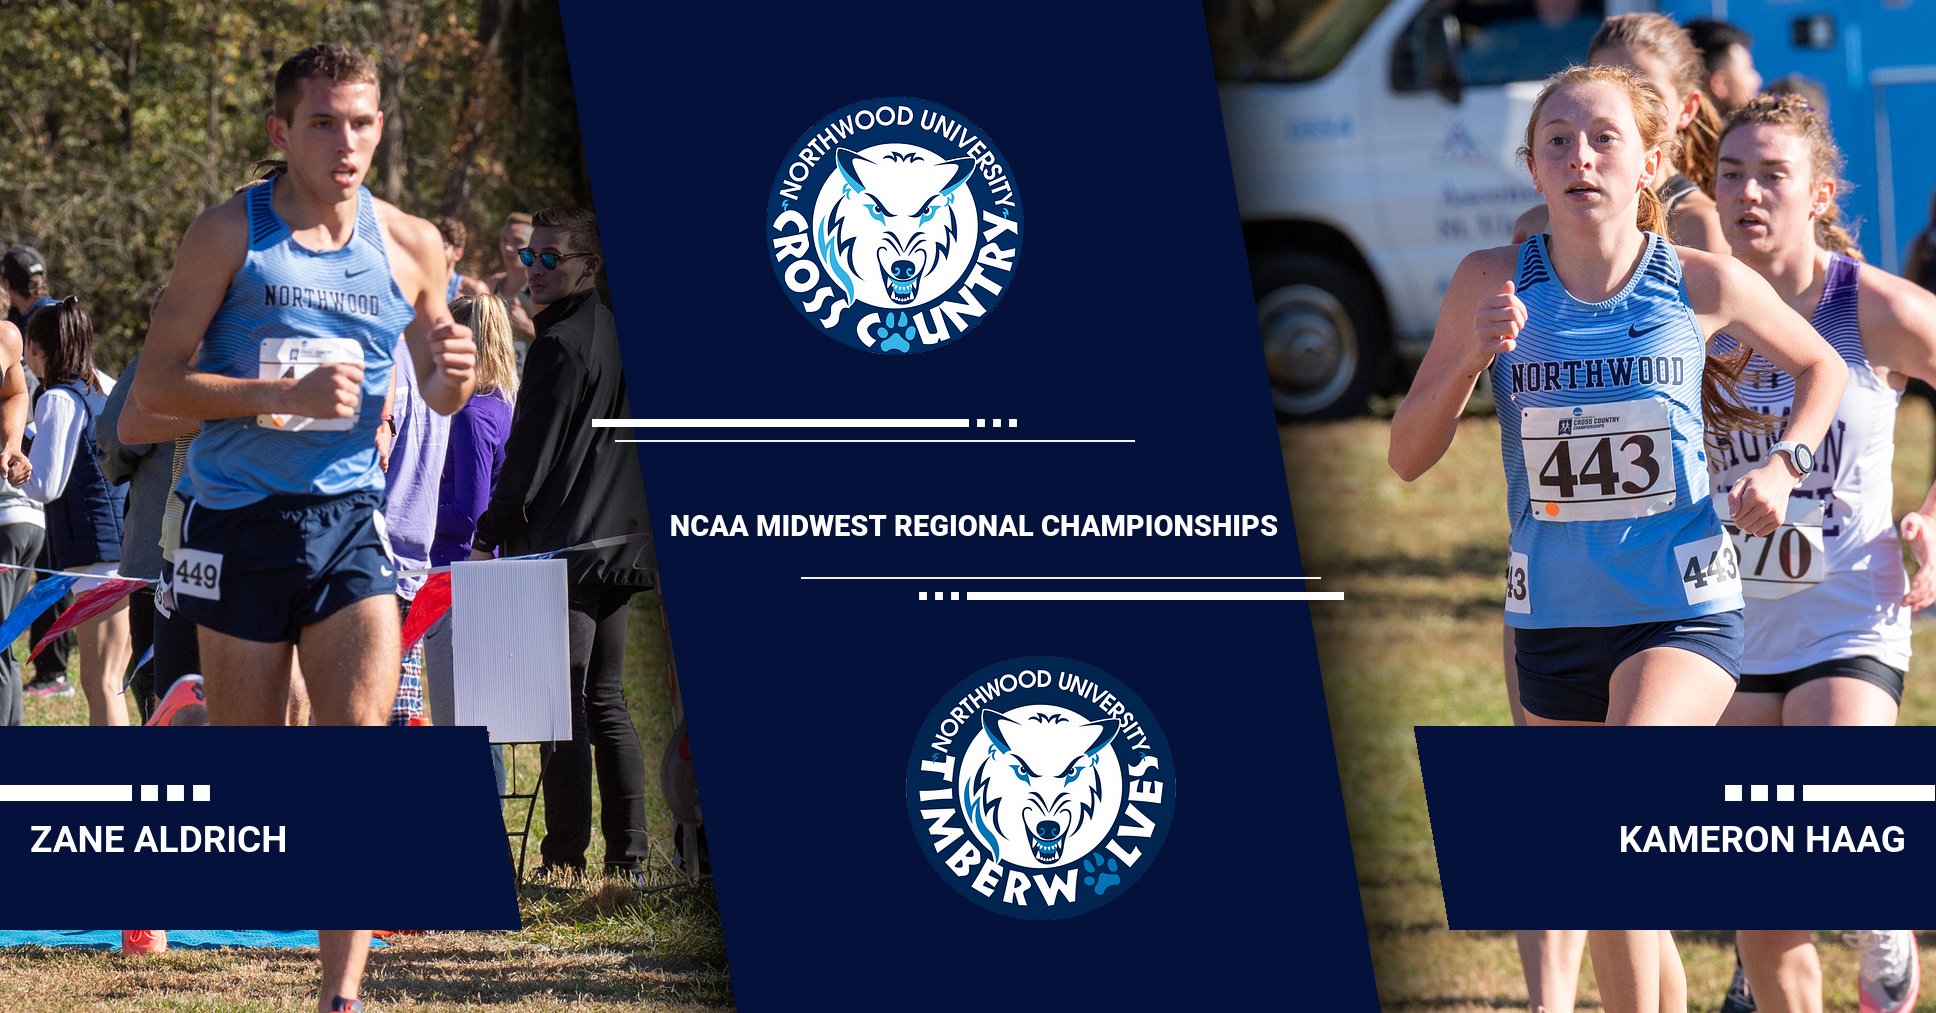 Zane Aldrich Highlights Cross Country Programs Competing at NCAA Regional Championships